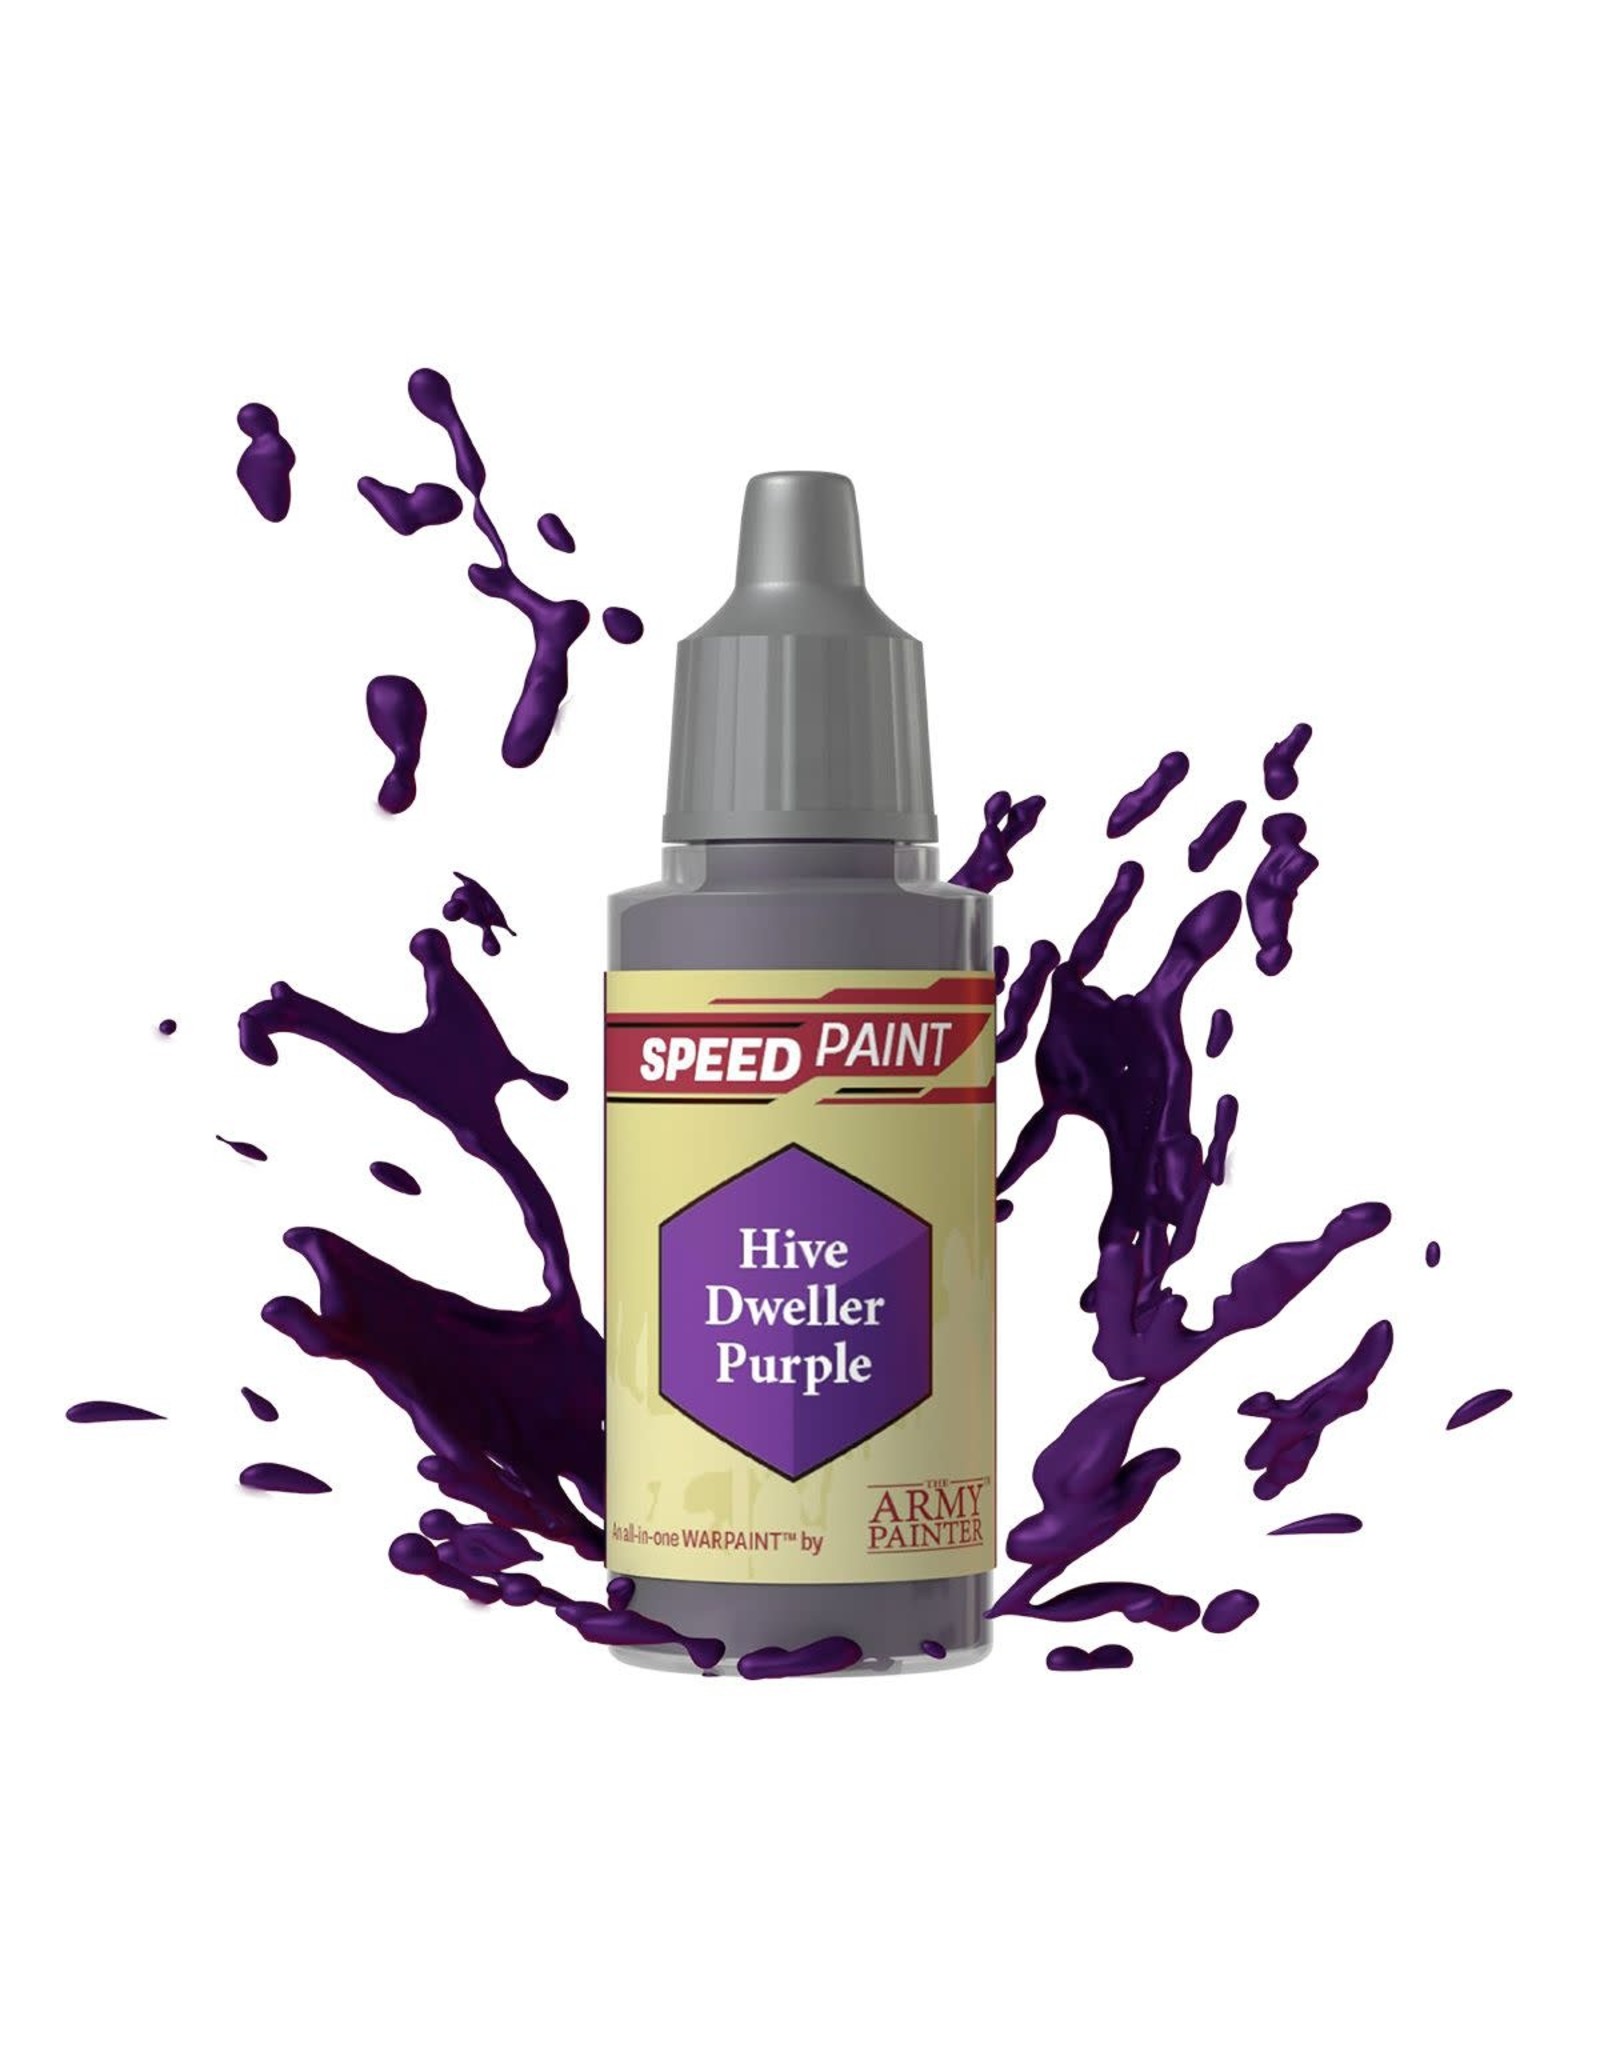 The Army Painter WP2018 Hive Dweller Purple